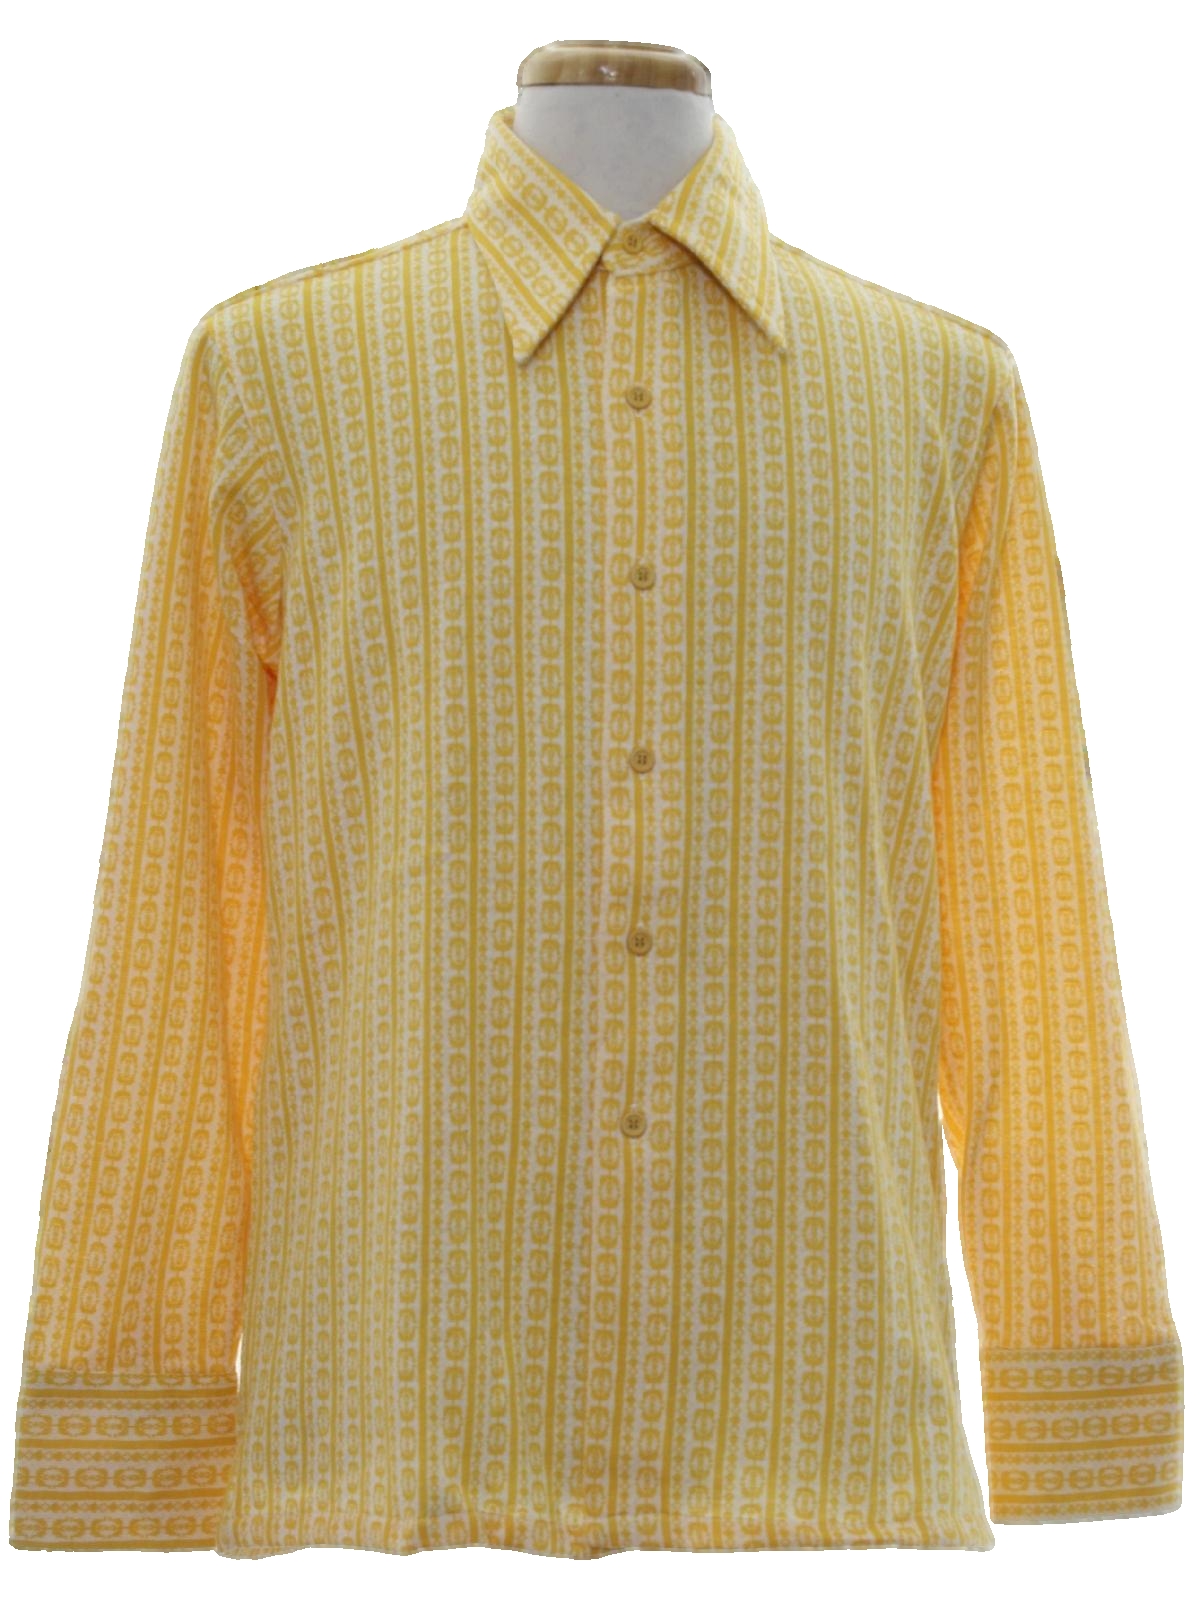 Retro Seventies Shirt: 70s -Imperial Knits- Mens harvest gold blended ...